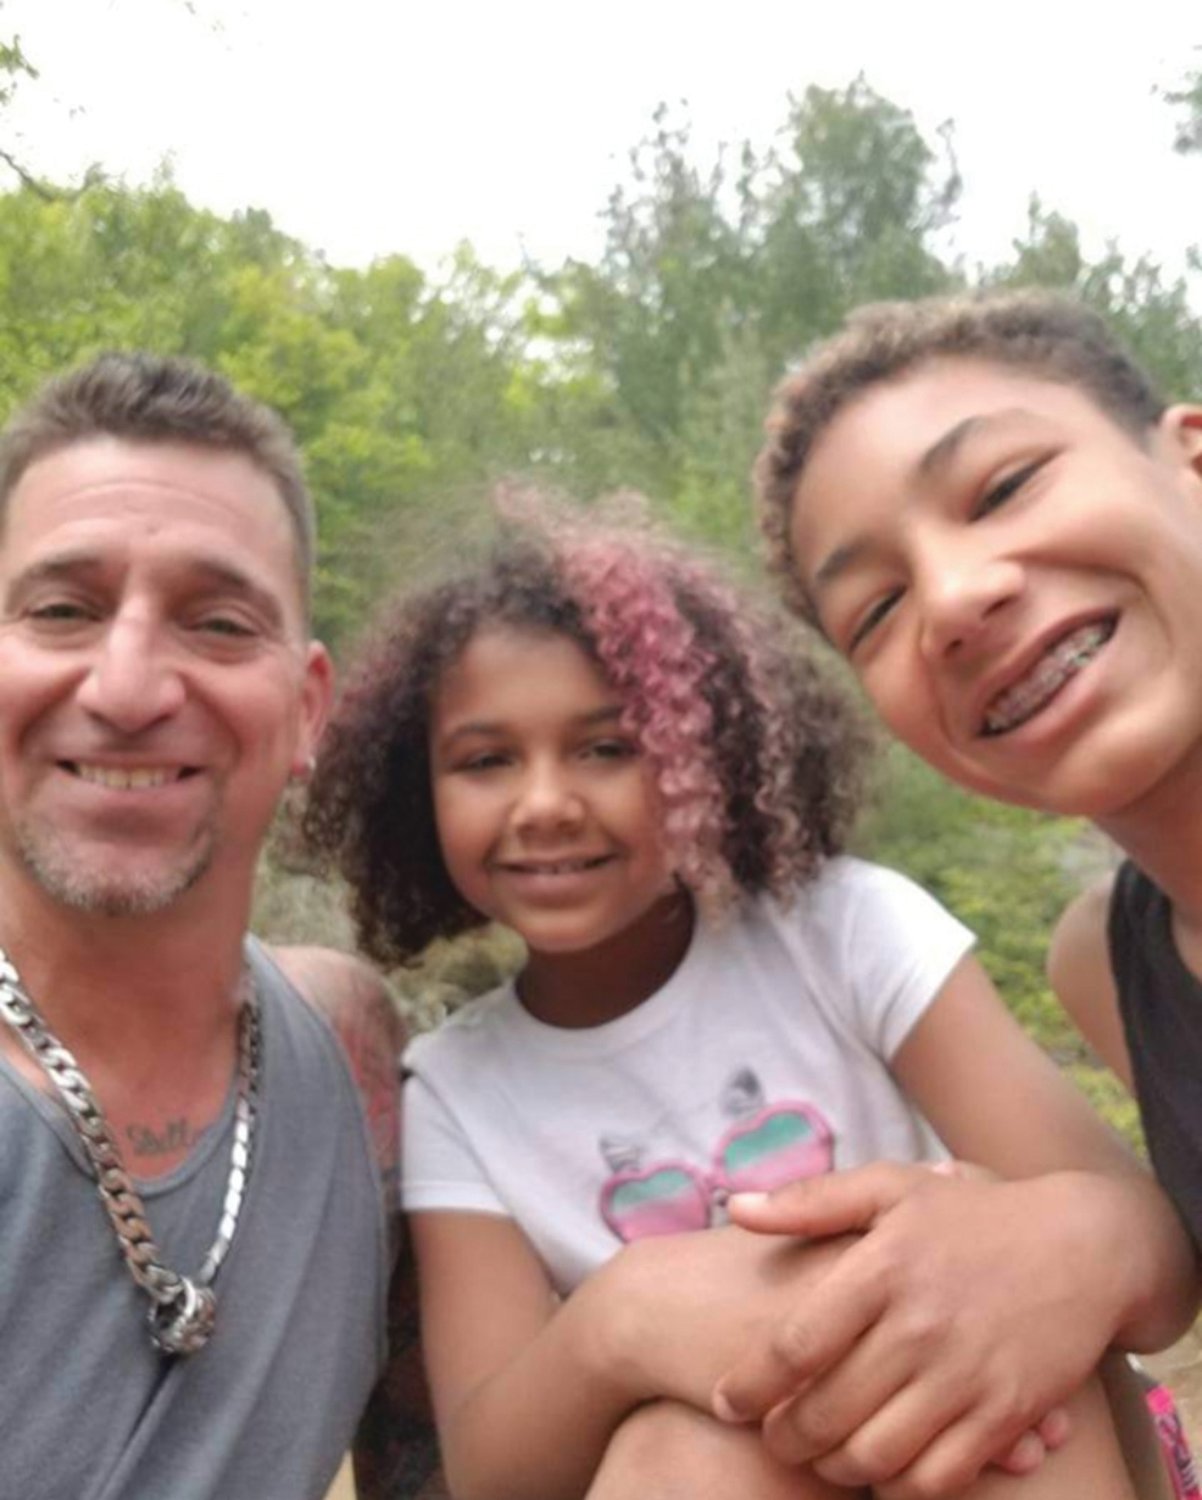 HAPPIER TIMES: David Viens poses for a photo with two of his kids — Racquell “Rocky” and Dillon Viens. Dillon died in February following a shooting in a Cedar Street home.